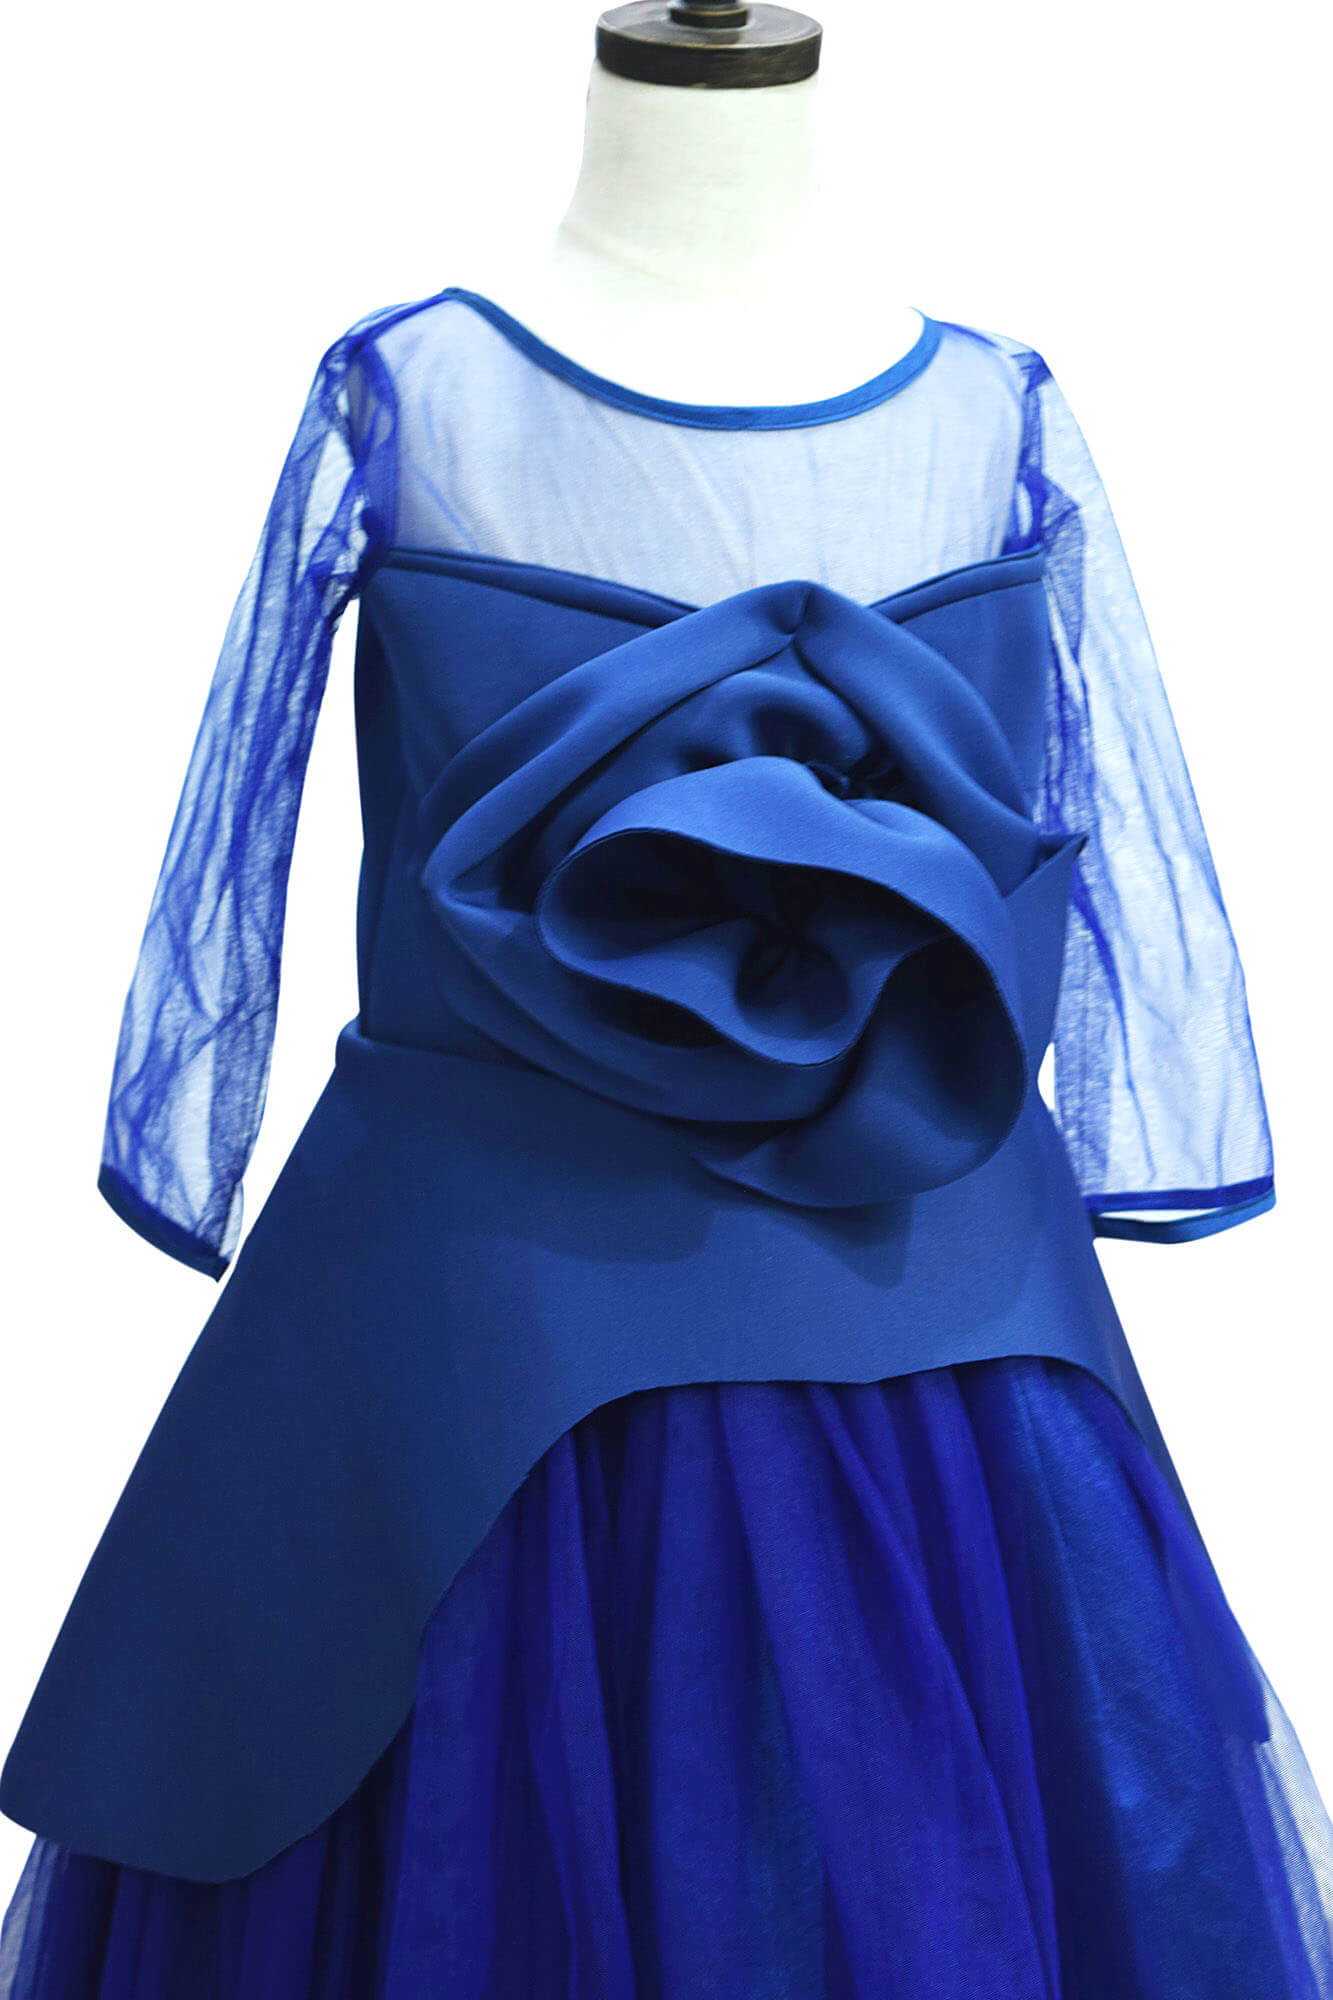 Custom Made Royal Blue High Neck Prom Cocktail Dress With Tea Length  Hemline And Cap Sleeves Perfect For Arabian Formal Evening Gowns And Royal  Blue Prom Dresses In African Style From Yymdress,